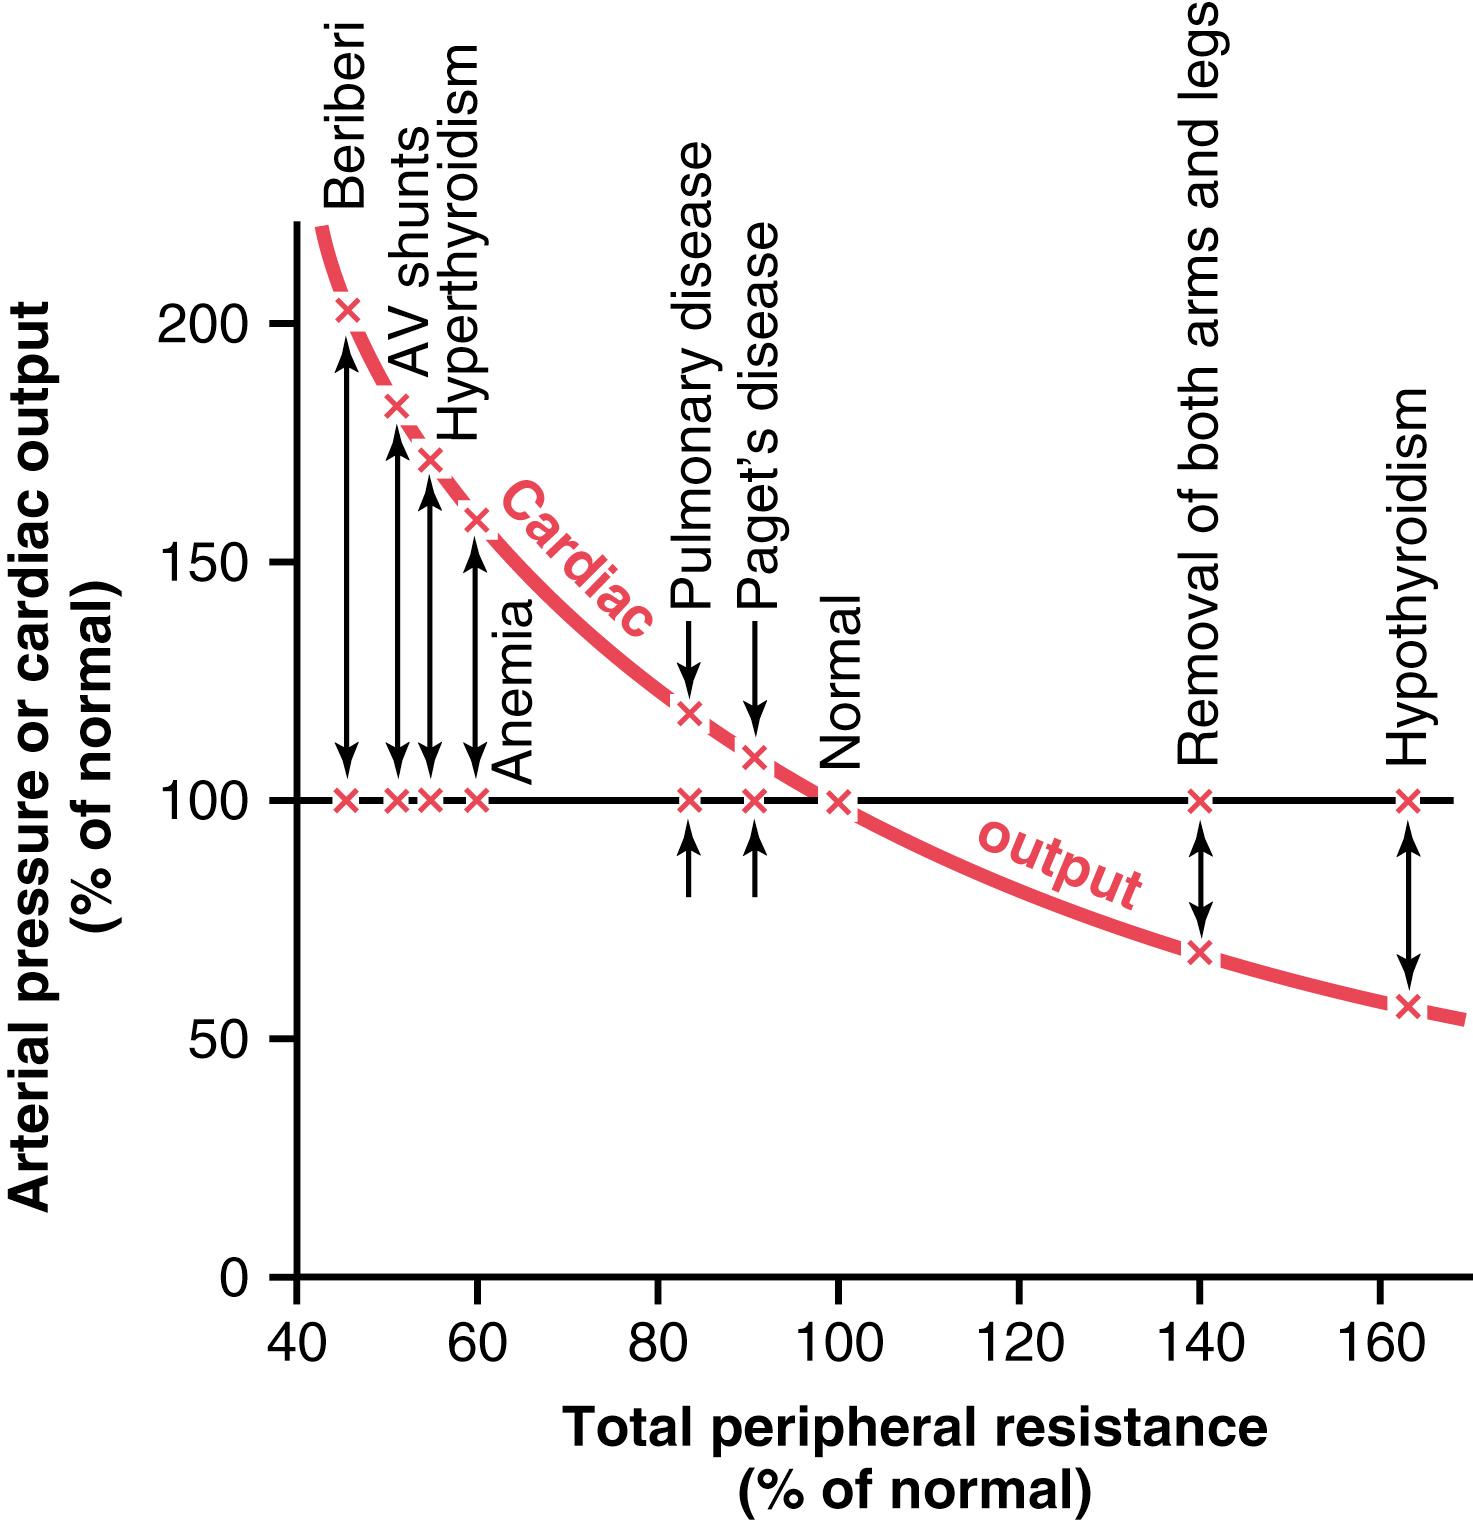 Figure 20-4., Chronic effect of different levels of total peripheral resistance on cardiac output, showing a reciprocal relationship between total peripheral resistance and cardiac output. AV, Atrioventricular.